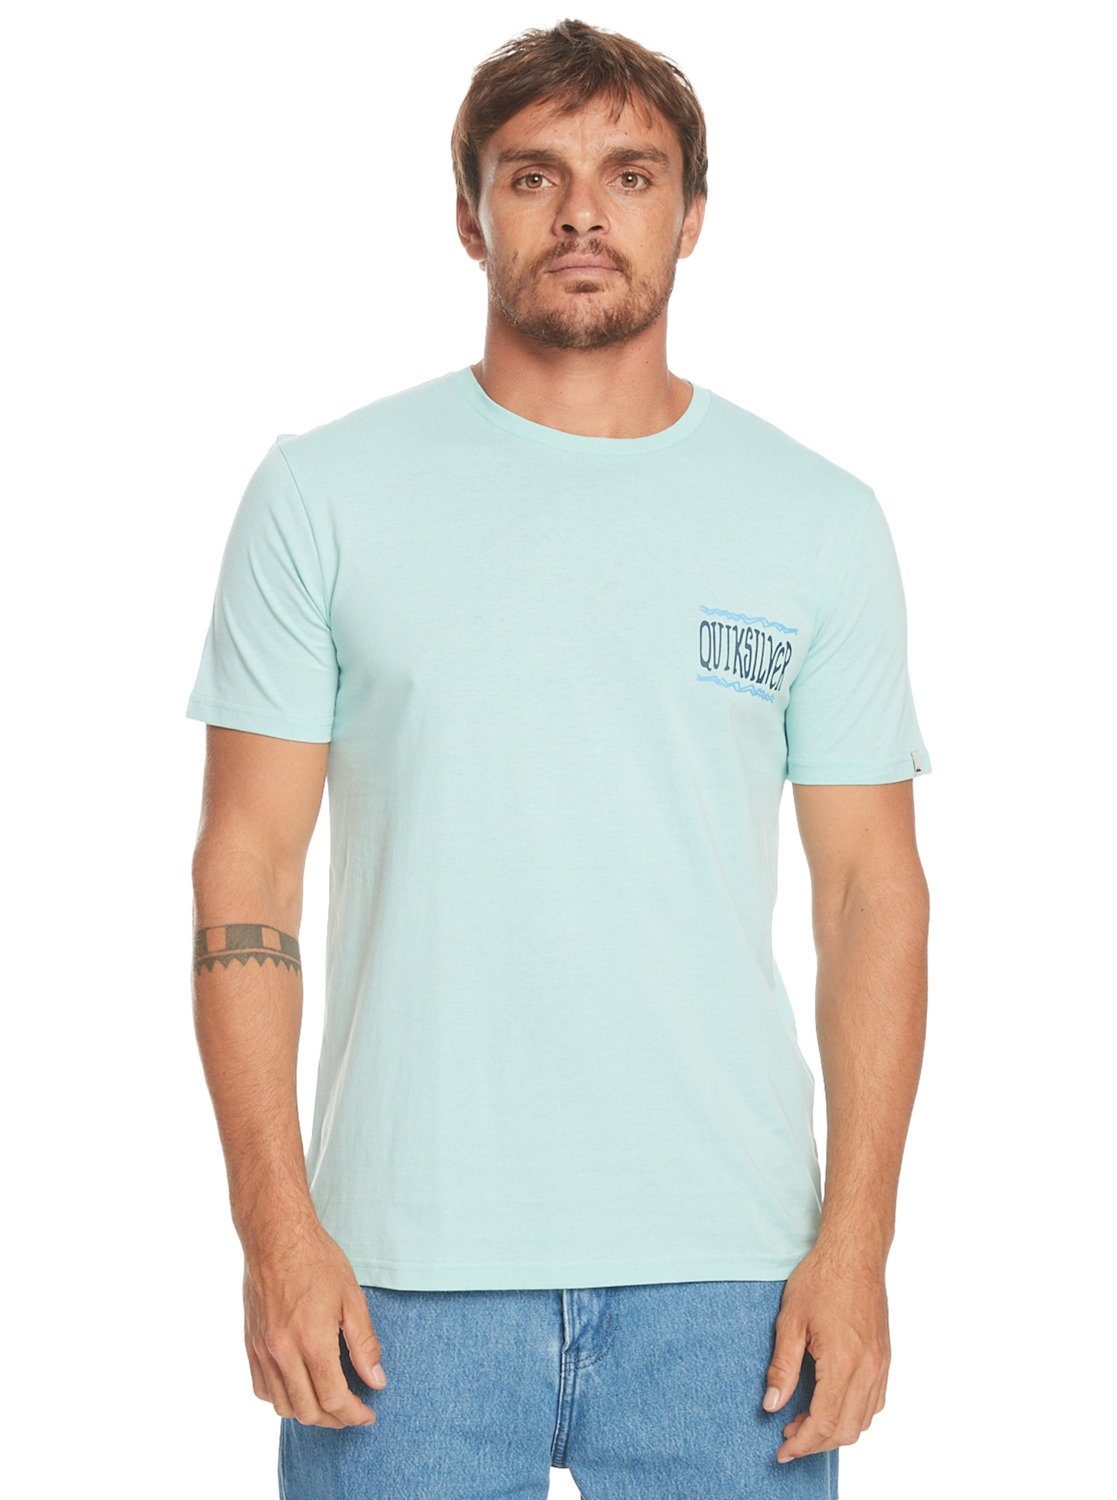 Turquoise Pastel Roots Taking Quiksilver T-Shirt